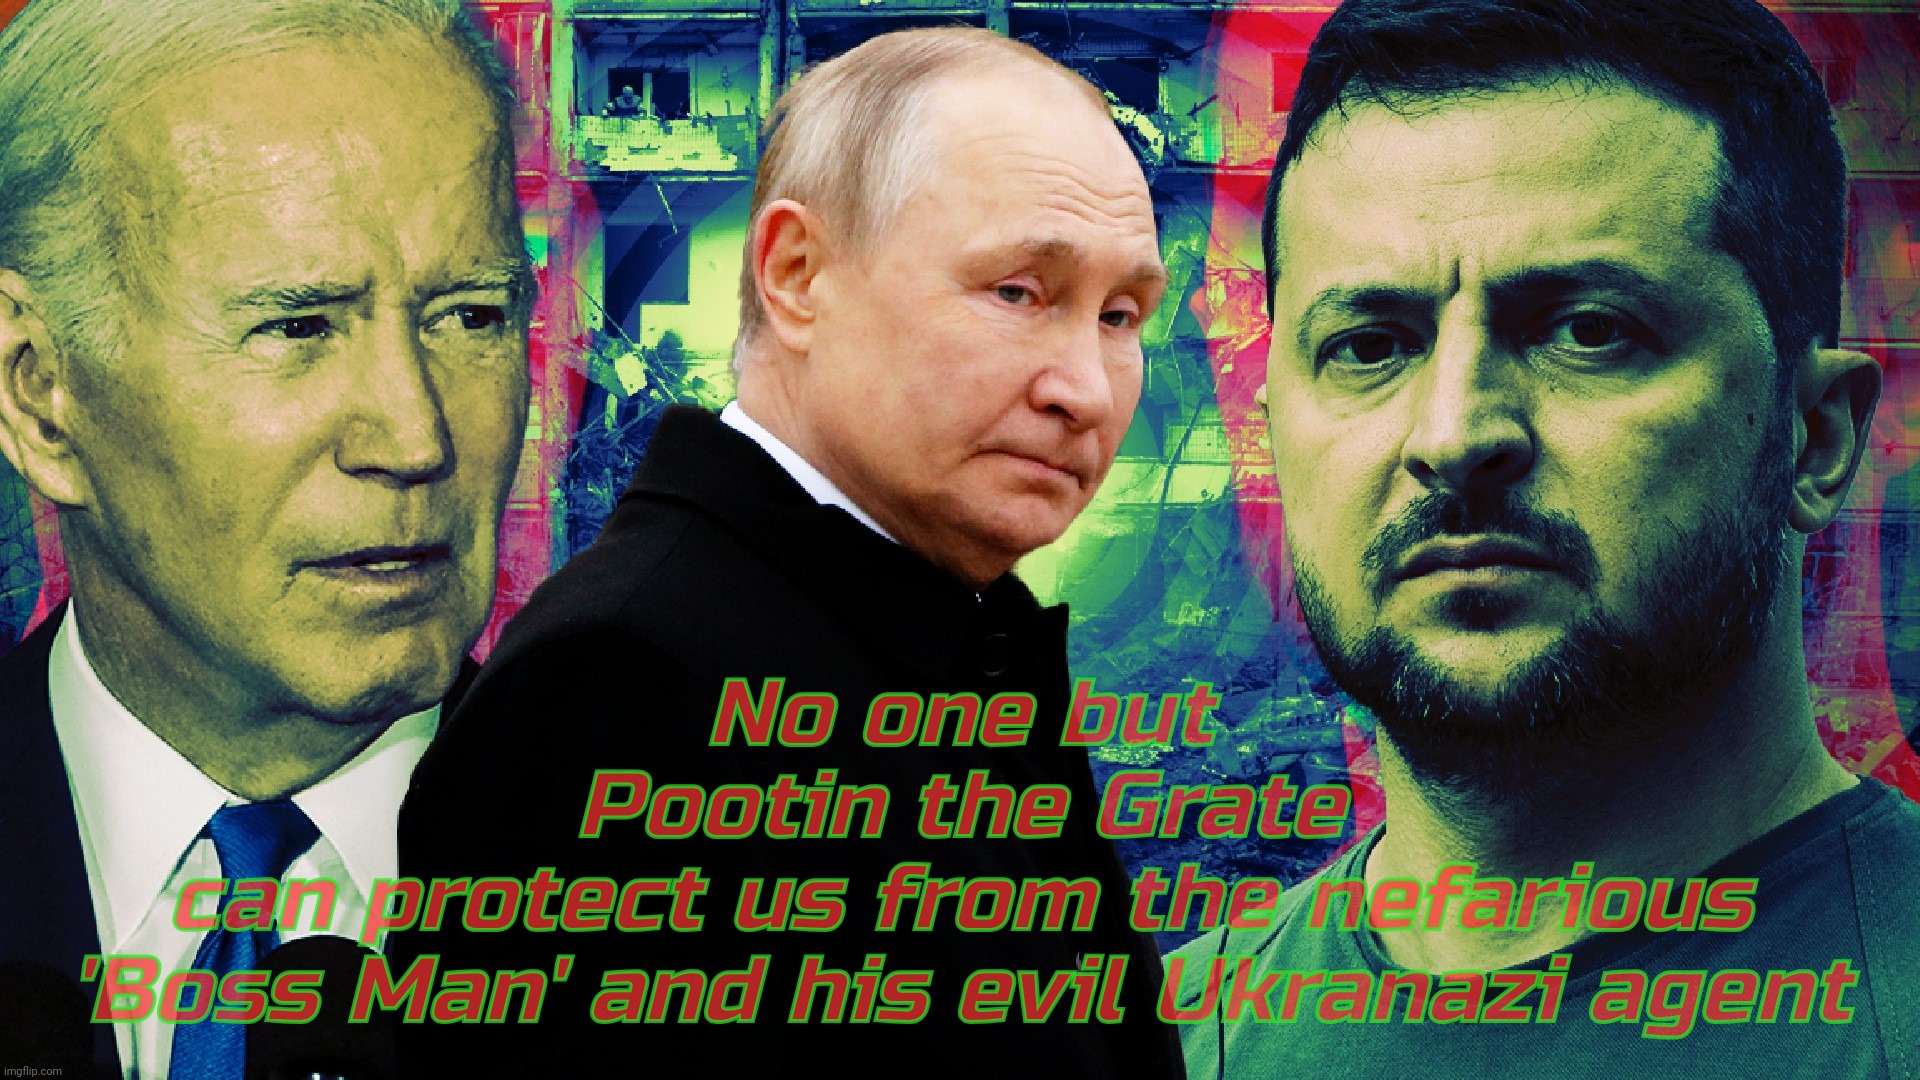 This is nothing less than a battle between good & evil. Support Papa Pootain's gallant fight against the invading Ukranazis | No one but
Pootin the Grate
can protect us from the nefarious
'Boss Man' and his evil Ukranazi agent | image tagged in ukraine,ukraine war,volodymyr zelenskyy,joe biden,vladimir putin,ukranazis | made w/ Imgflip meme maker